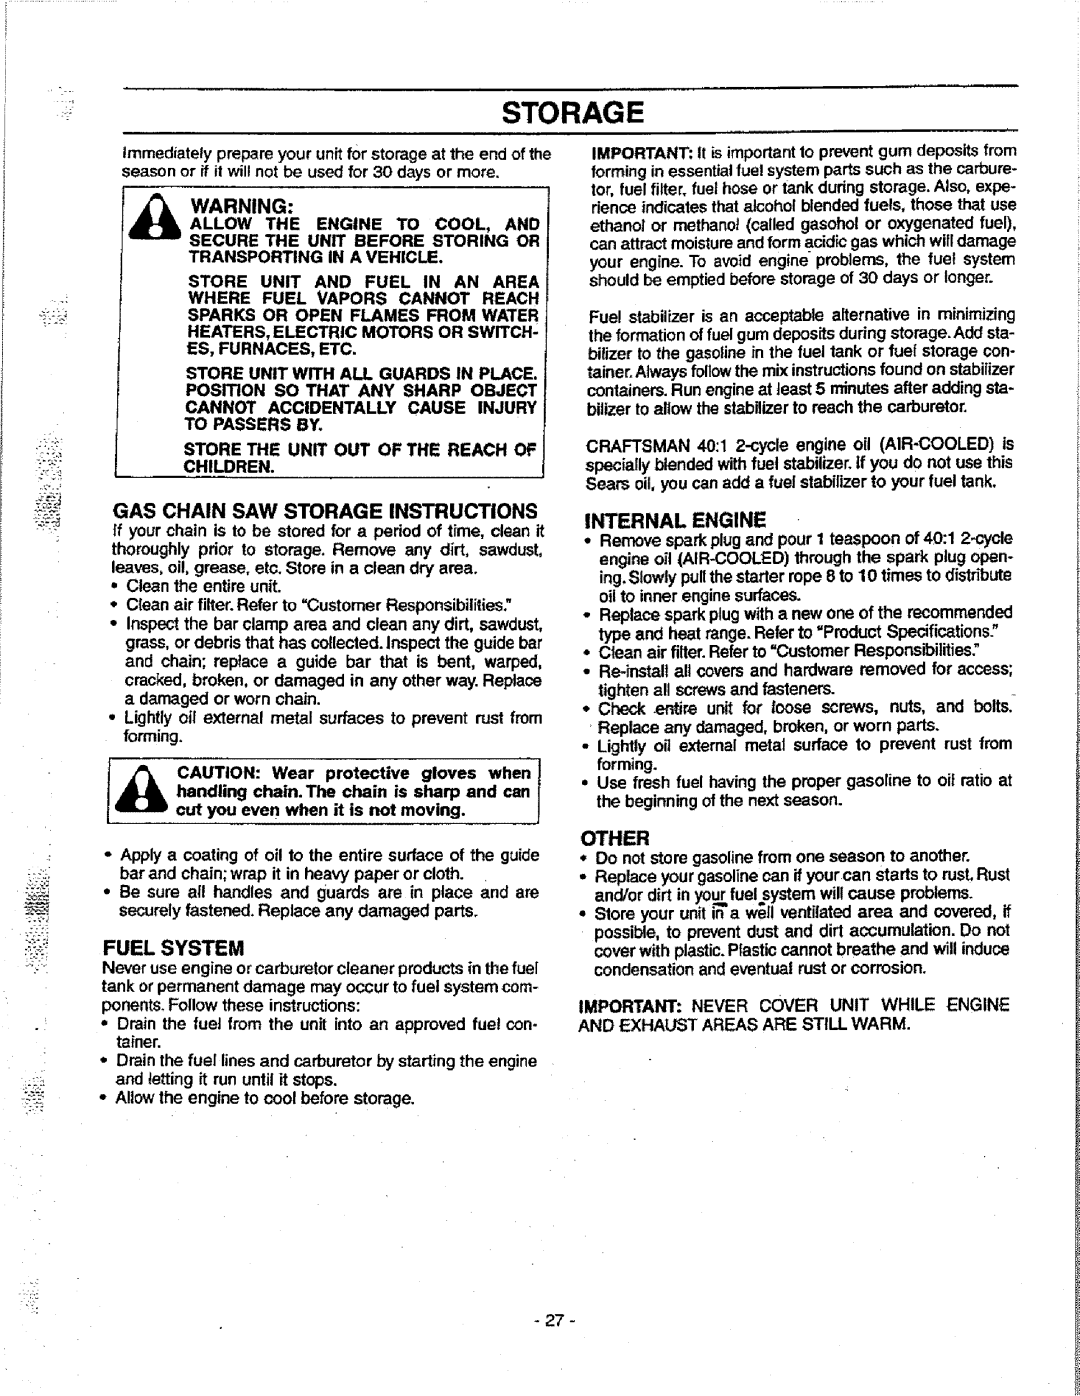 Craftsman 358.351080 manual Gas Chain Saw Storage Instructions, Fuel System, Internal Engine, Other 